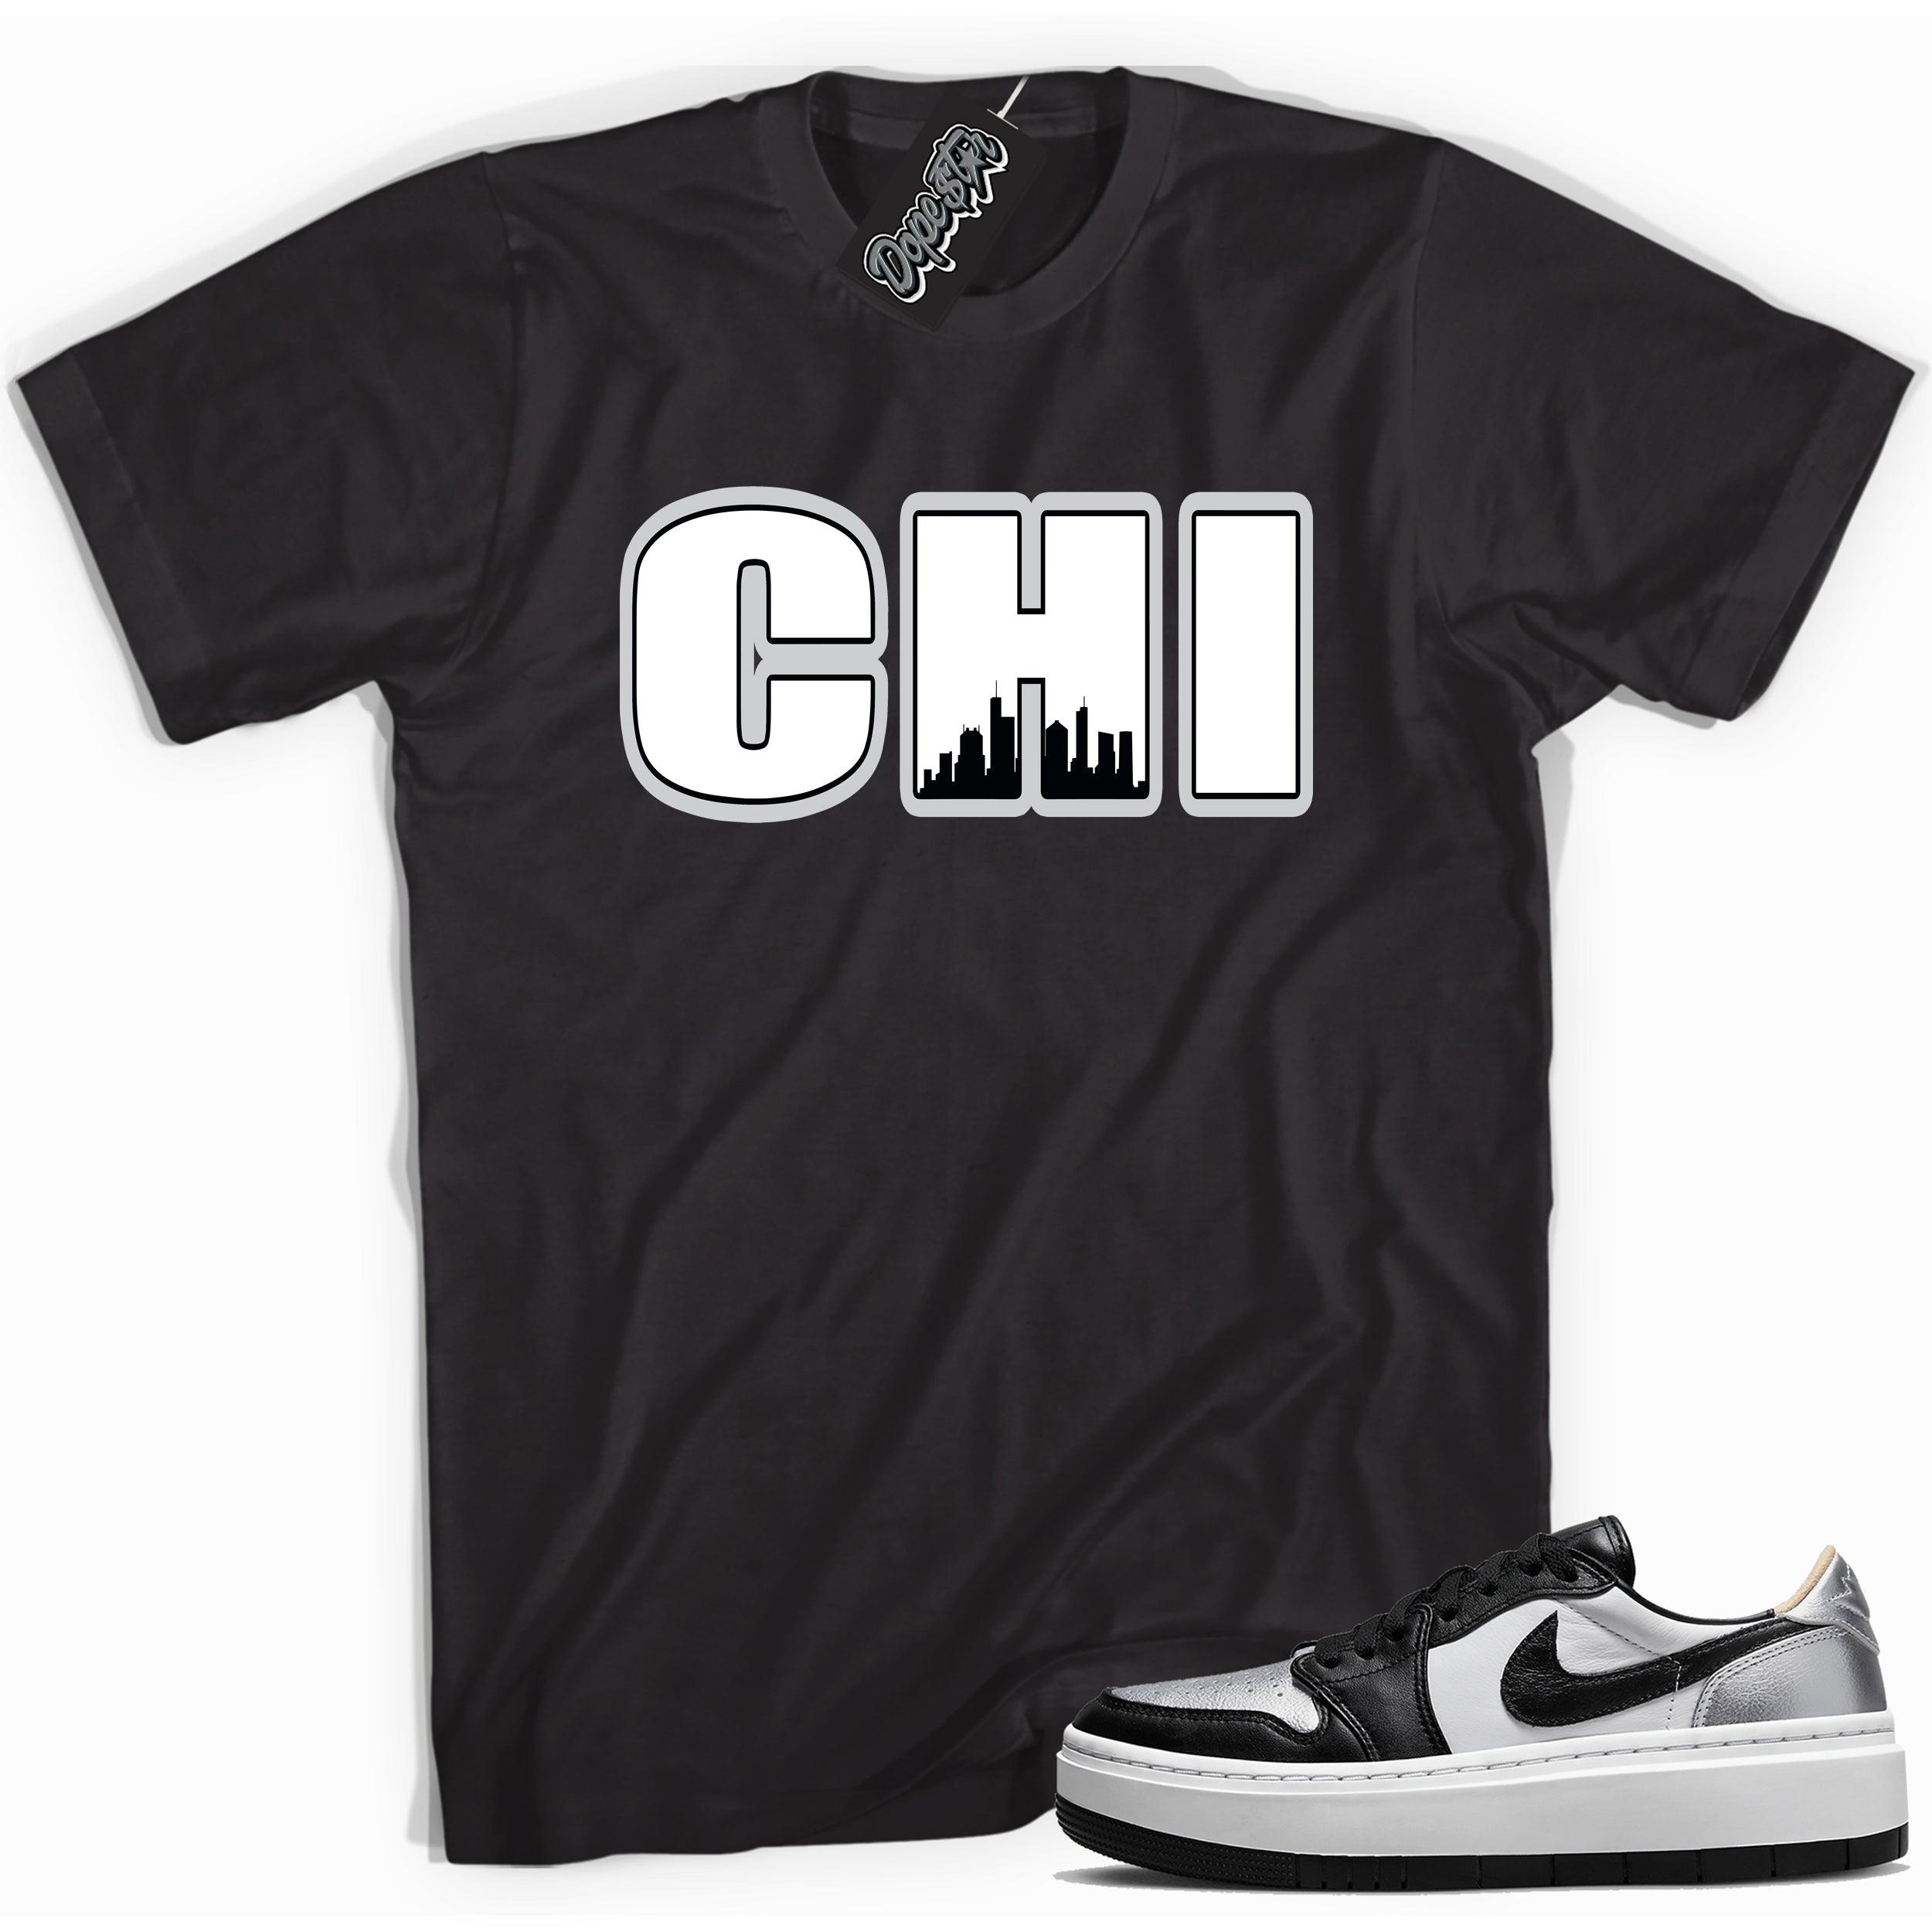 Cool black graphic tee with 'Chicago chi town' print, that perfectly matches Air Jordan 1 Elevate Low SE Silver Toe sneakers.